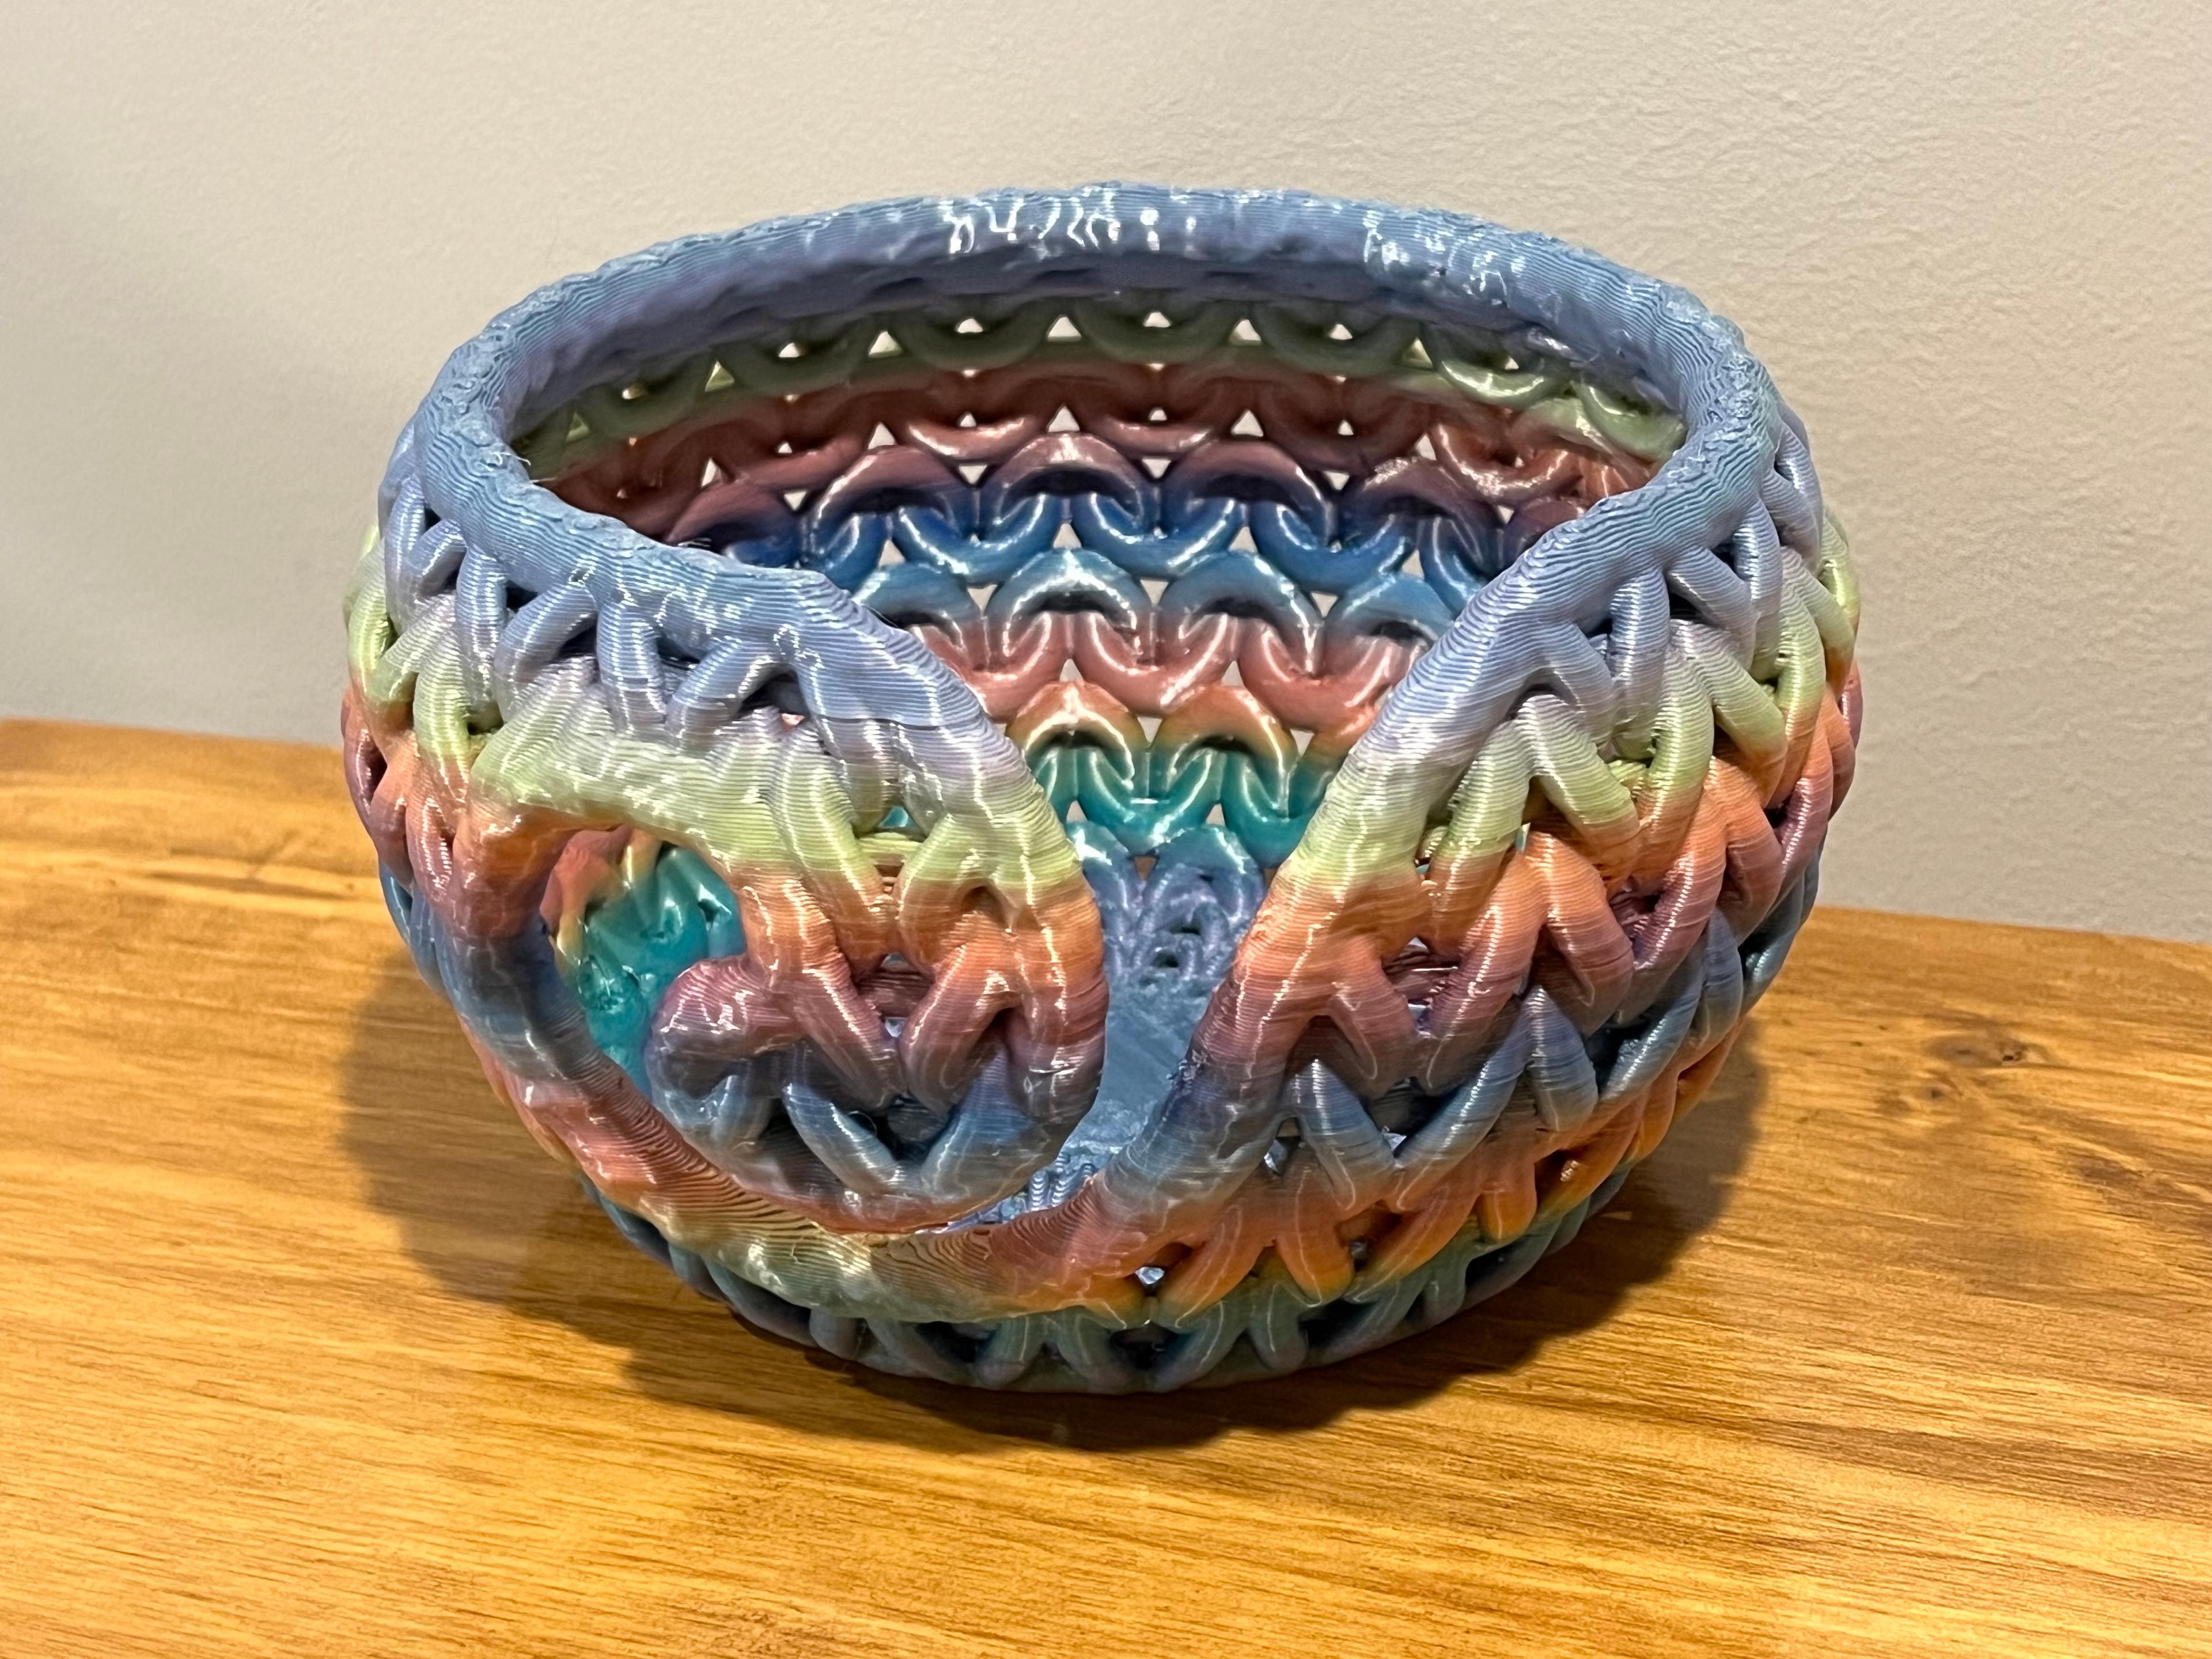 Yarn Bowl - Prusa Mini, 0.4mm layer height, 0.8mm nozzle, PrusaSlicer. Custom supports for the front swirl. YOUSU Rainbow PLA Filament. - 3d model